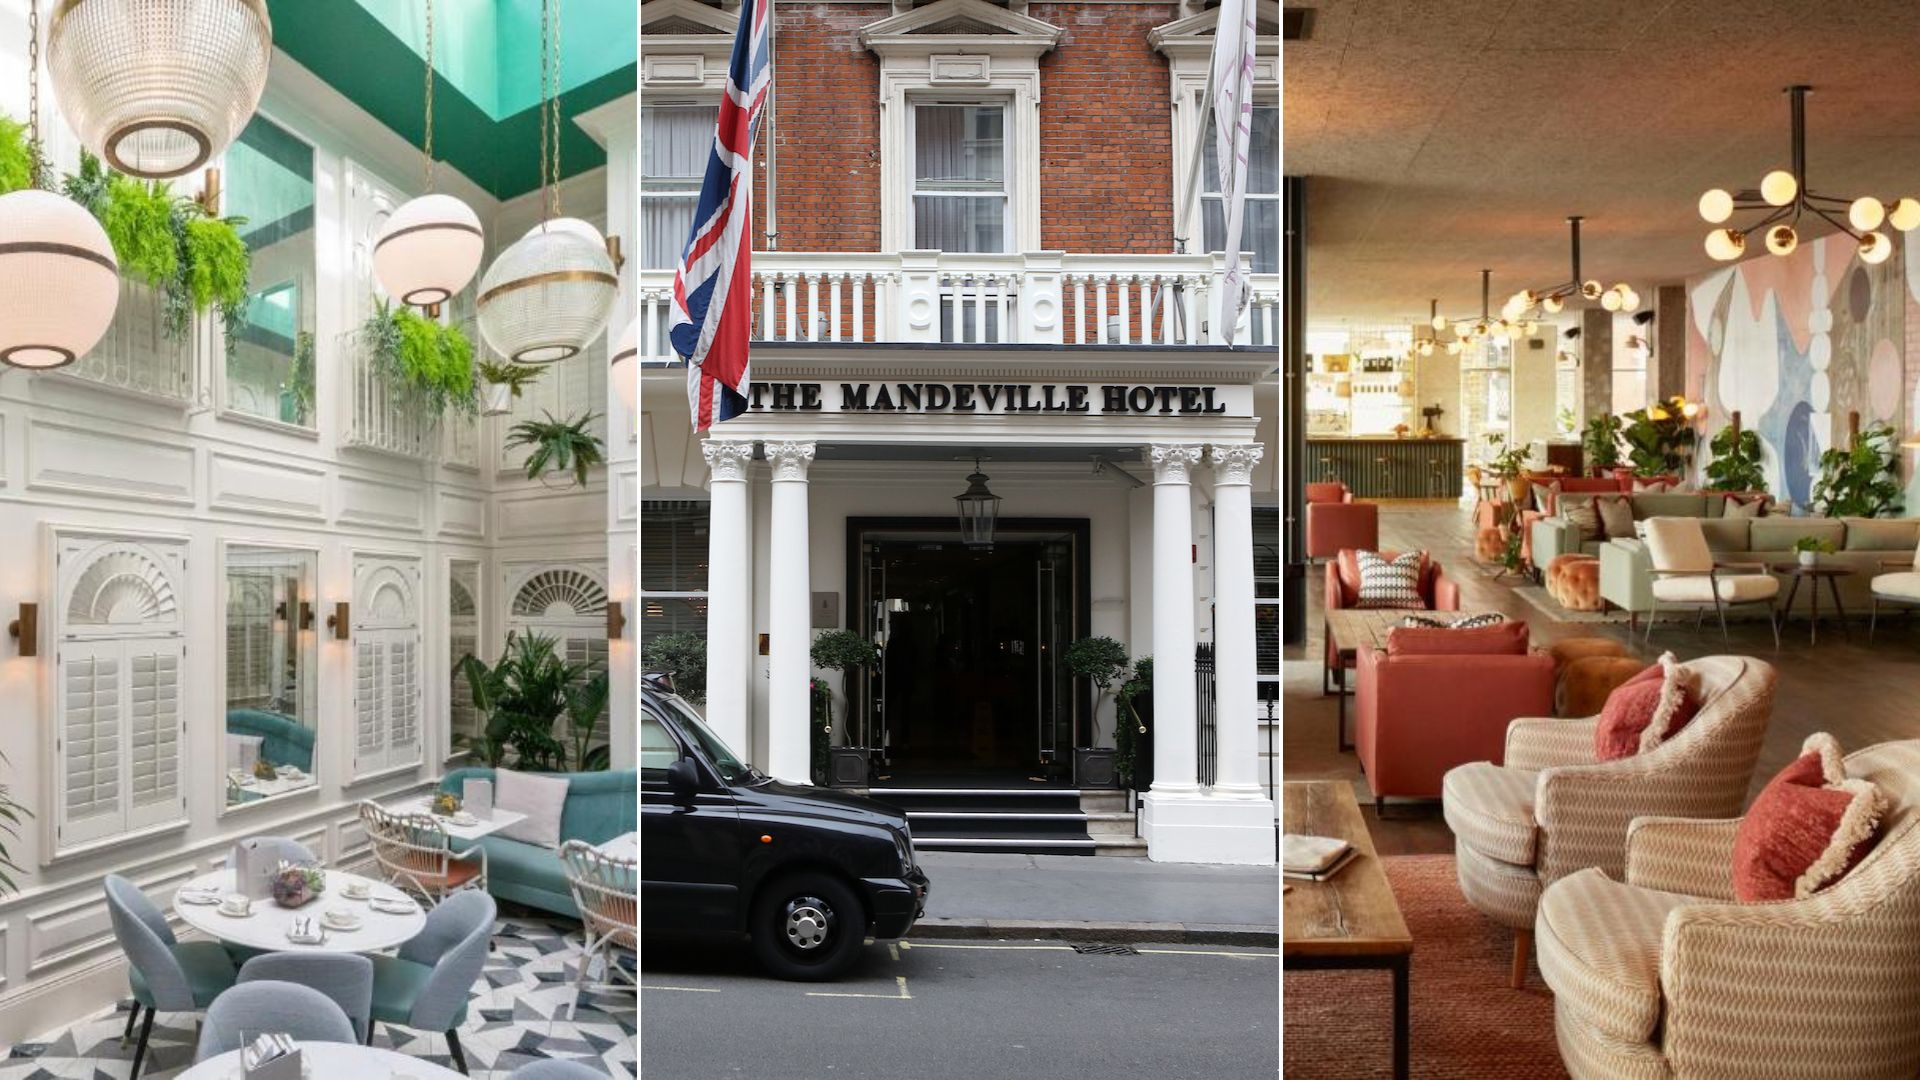 Affordable luxury hotels in London under night | Woman & Home